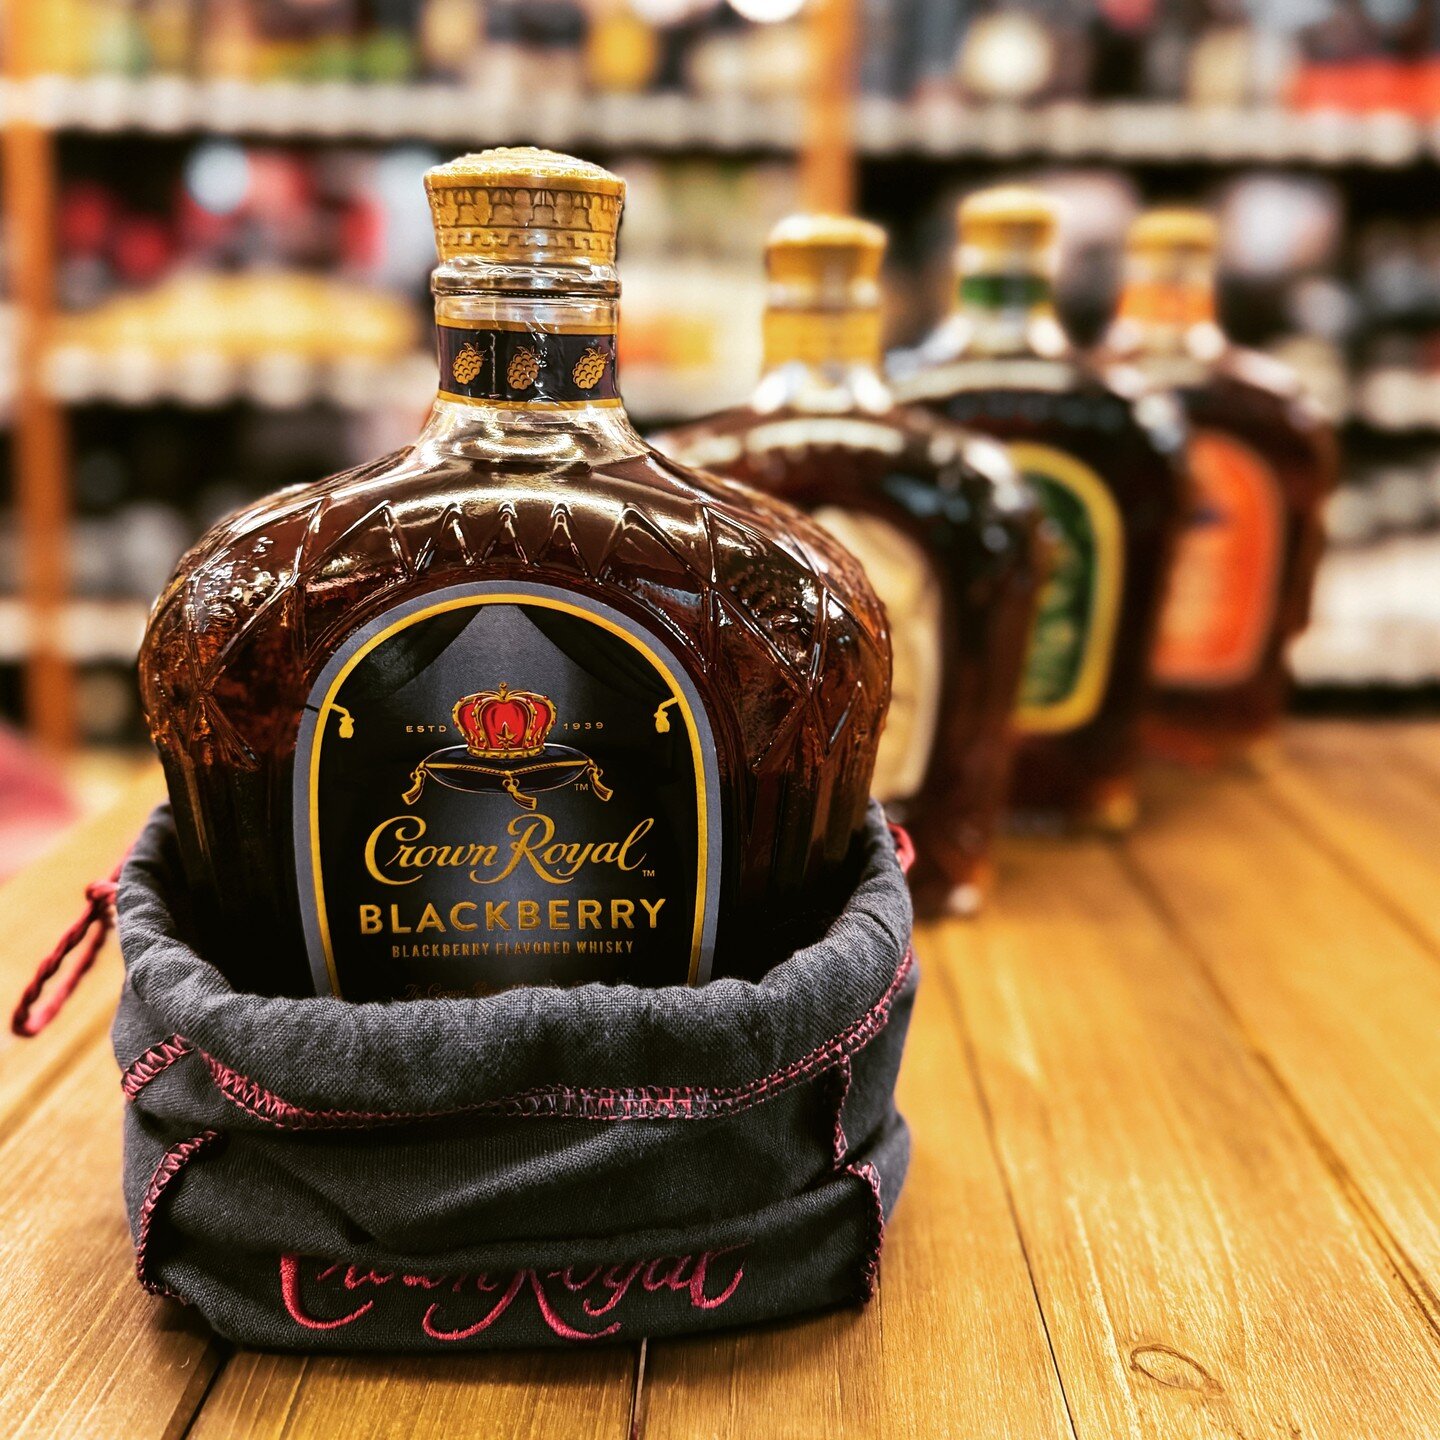 We are excited to offer Crown Royal's Seasonal release to our customers! Swing by and pick a bottle up from the shelf and try a Blackberry Whisky Sour:

2 oz Crown Royal Blackberry
1 oz Blackberry Brandy
1 oz Fresh Lemon Juice
Blackberries
Lemon wedg